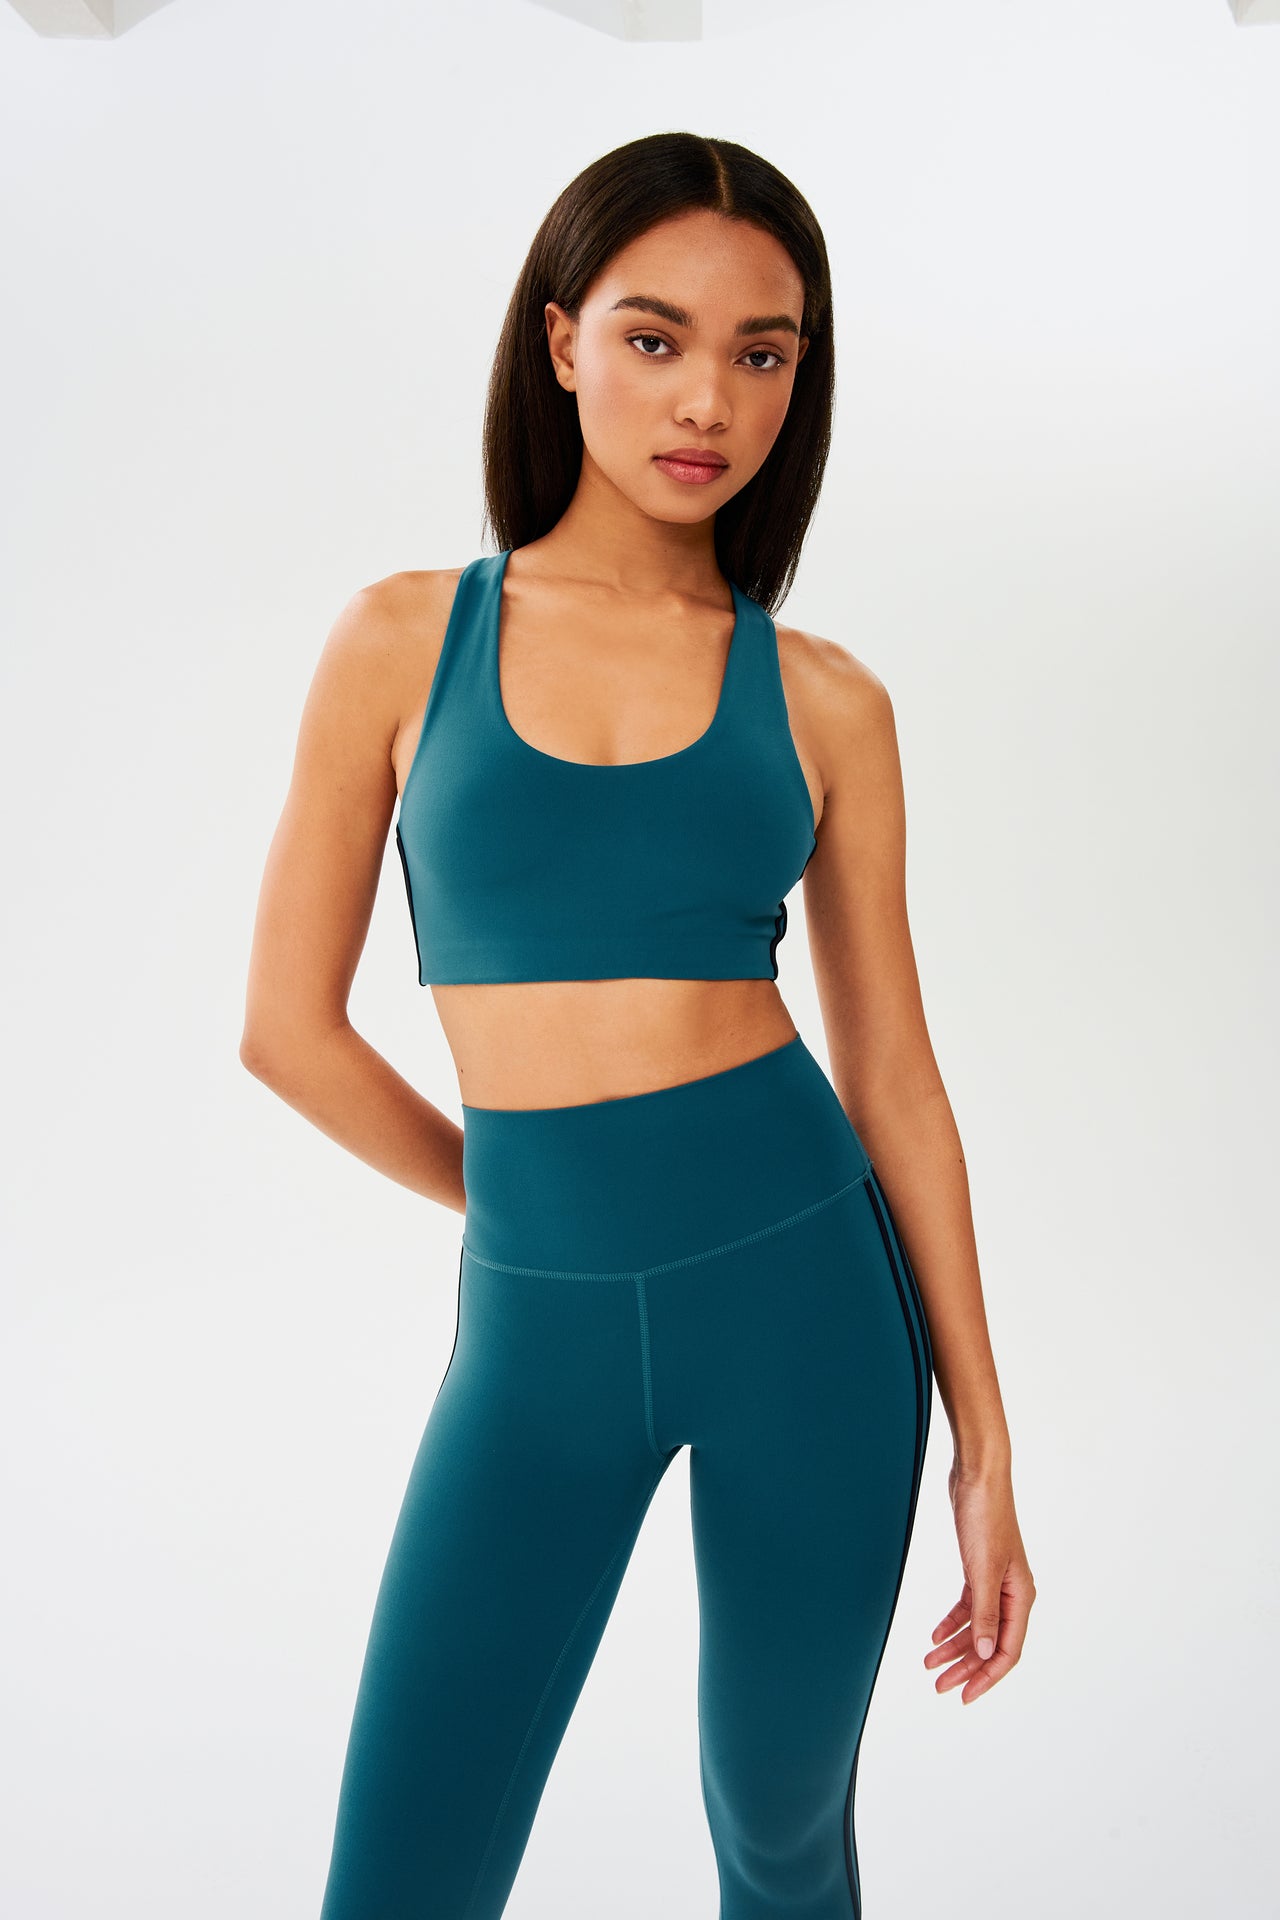 Front view of girl wearing greenish blue sports bra with two thin black stripes down the side and greenish blue leggings 